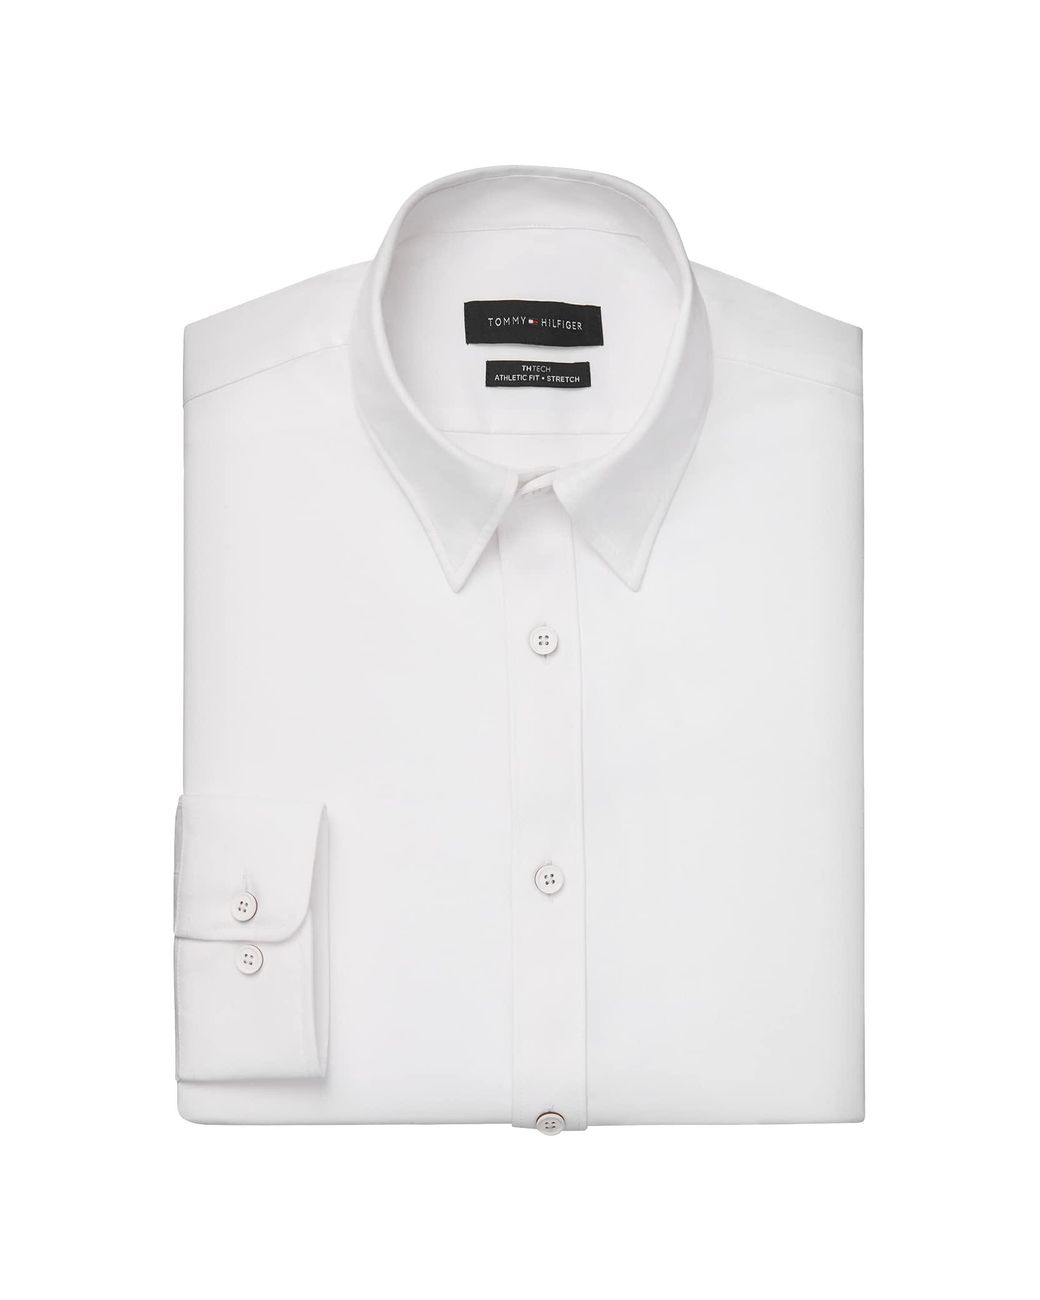 Tommy Hilfiger Dress Shirt Athletic Fit Tech Non Iron No-tuck Stretch ...